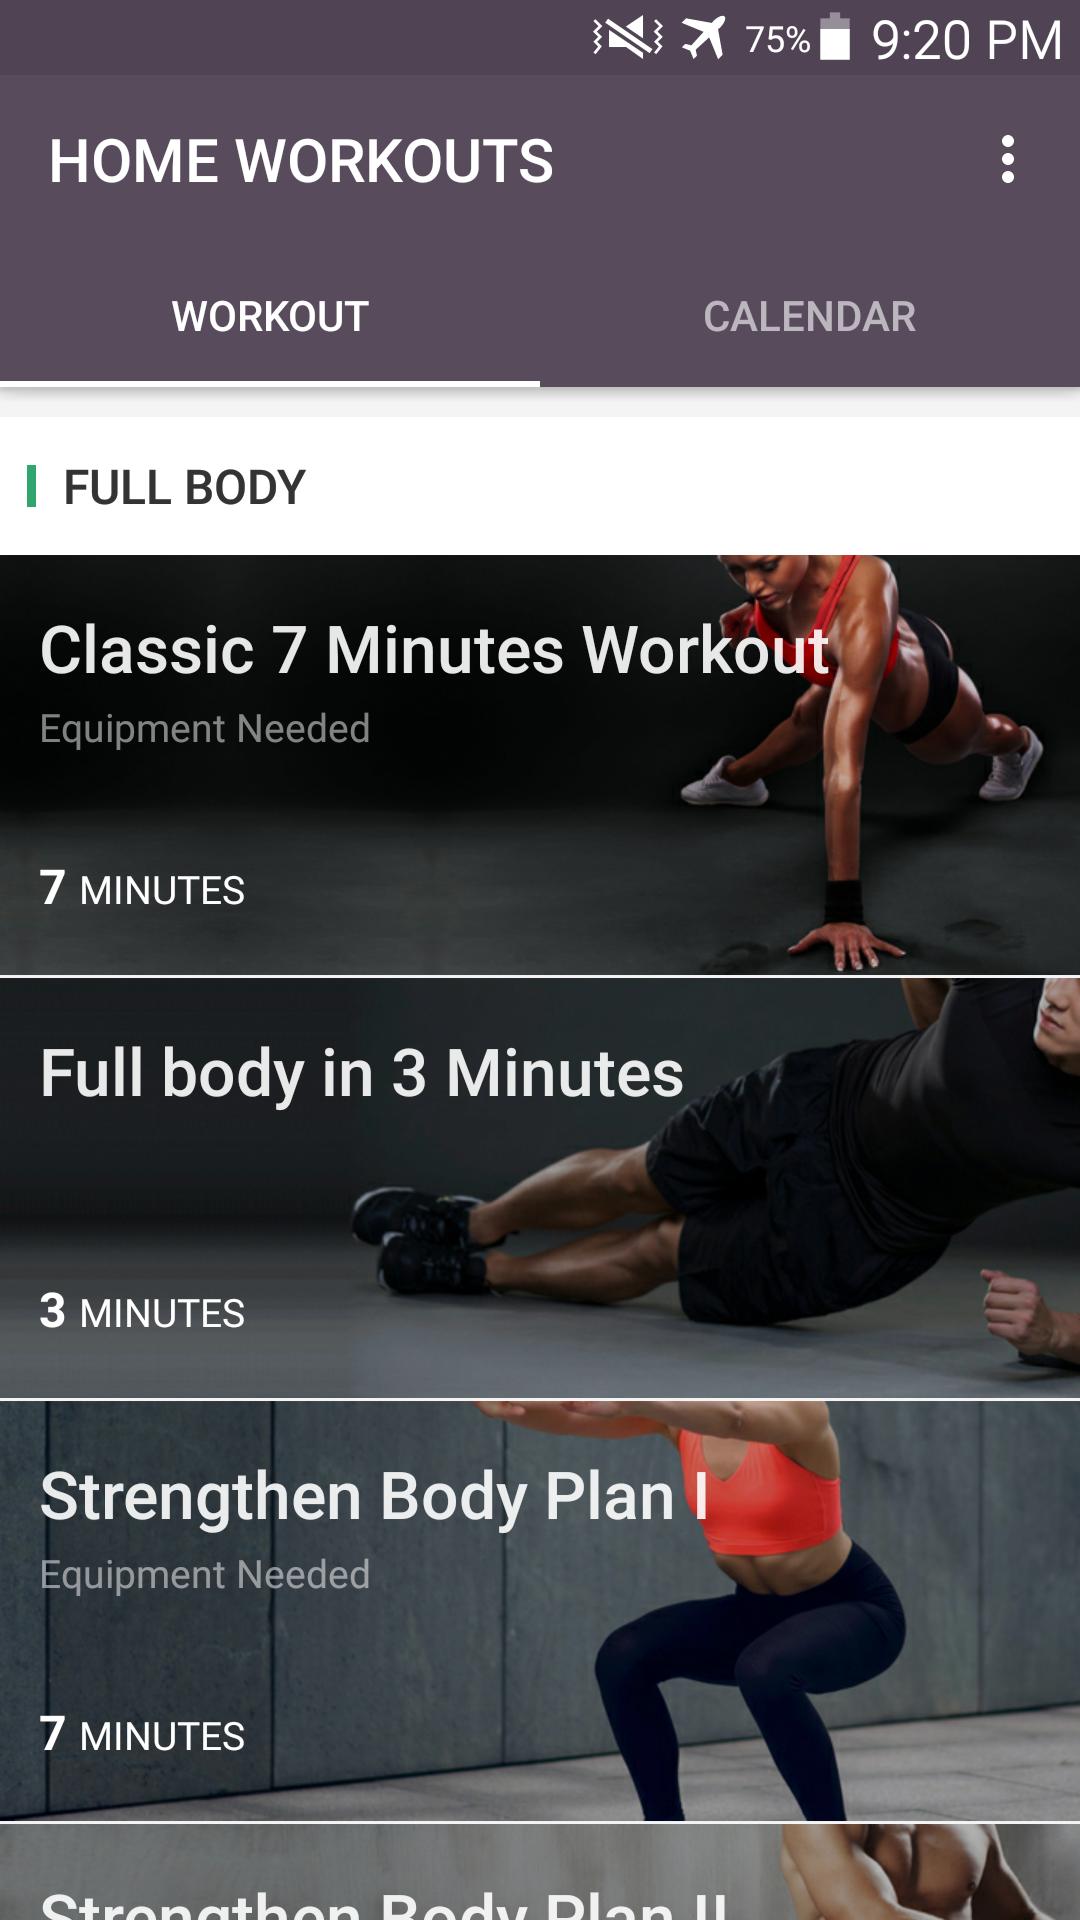 15 Minute Home Workout App Download For Android for Gym